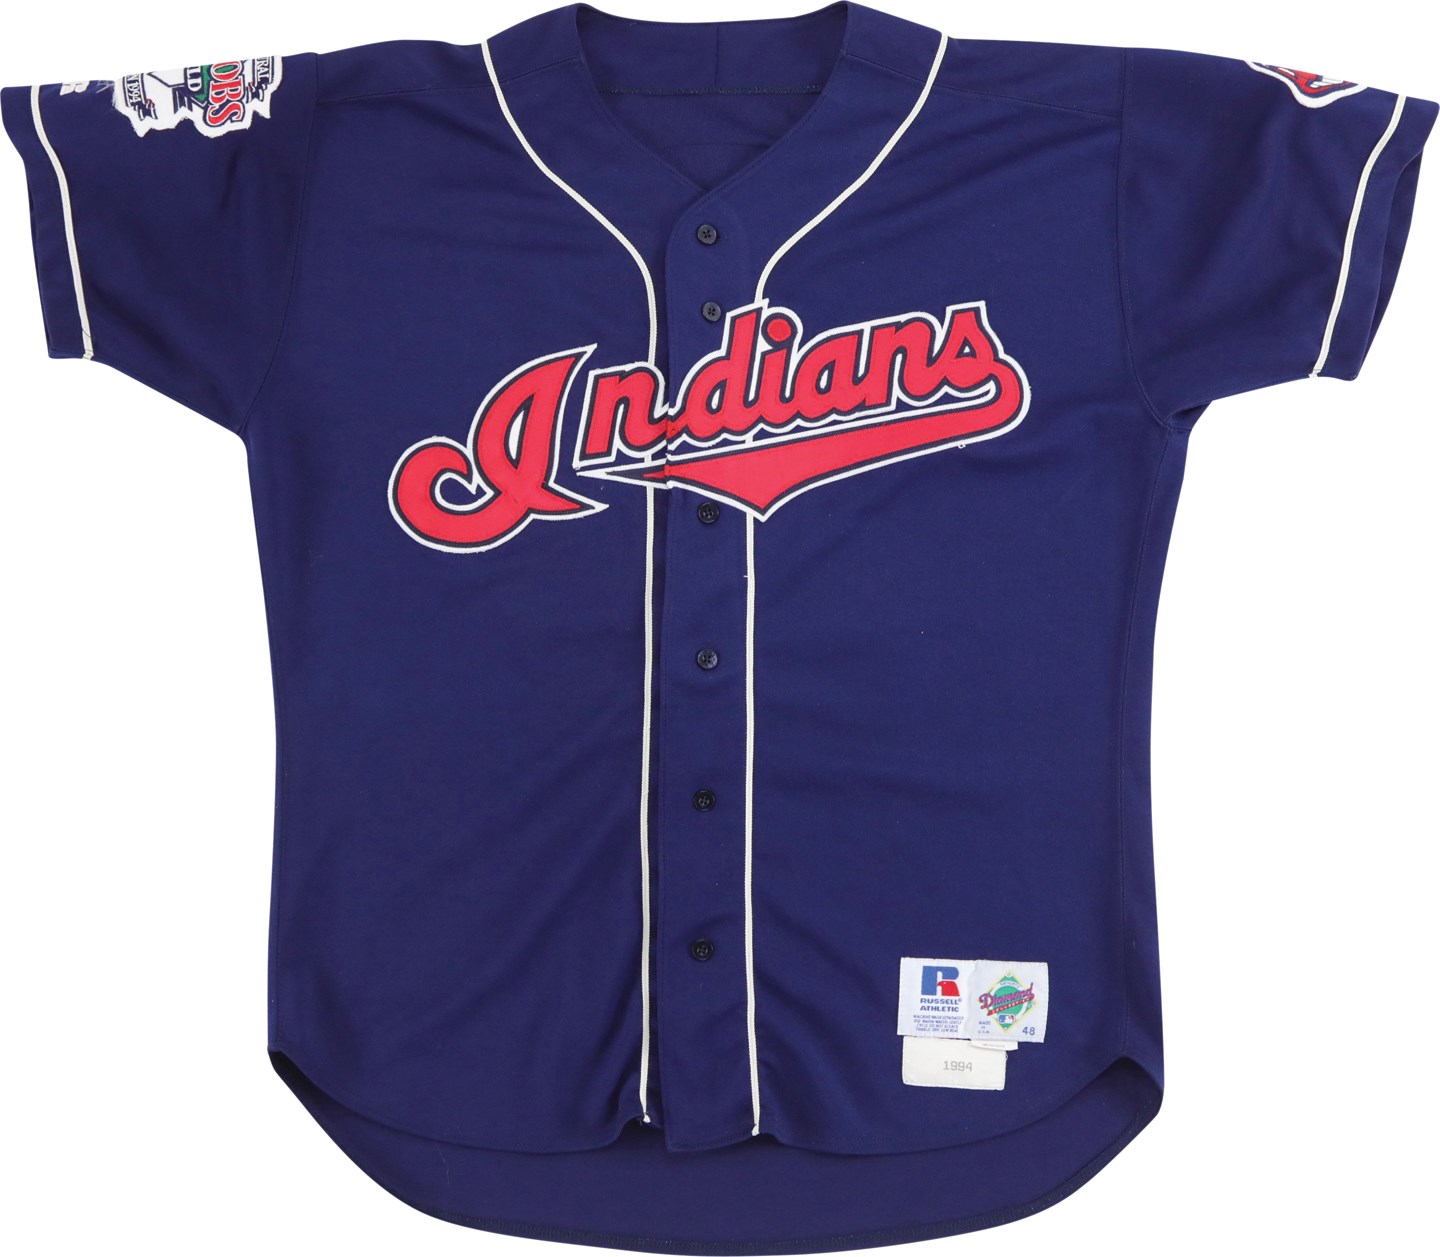 1994 Eddie Murray Career Hits #2,868 and #2,869 Cleveland Indians Game Worn Jersey (Photo-Matched to Three Games)